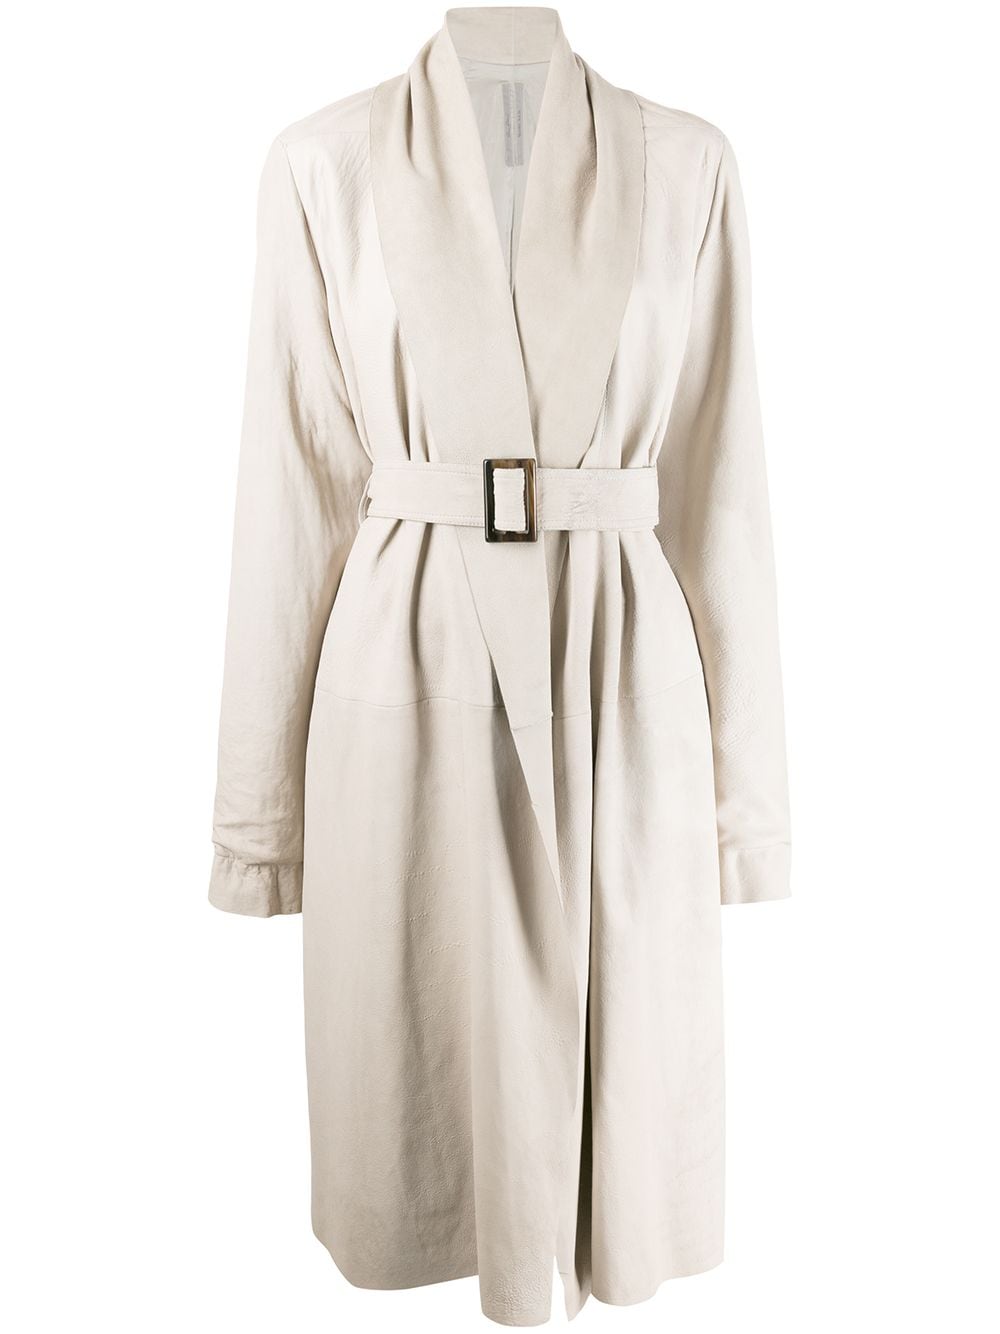 Rick Owens Belted Coat In Nude